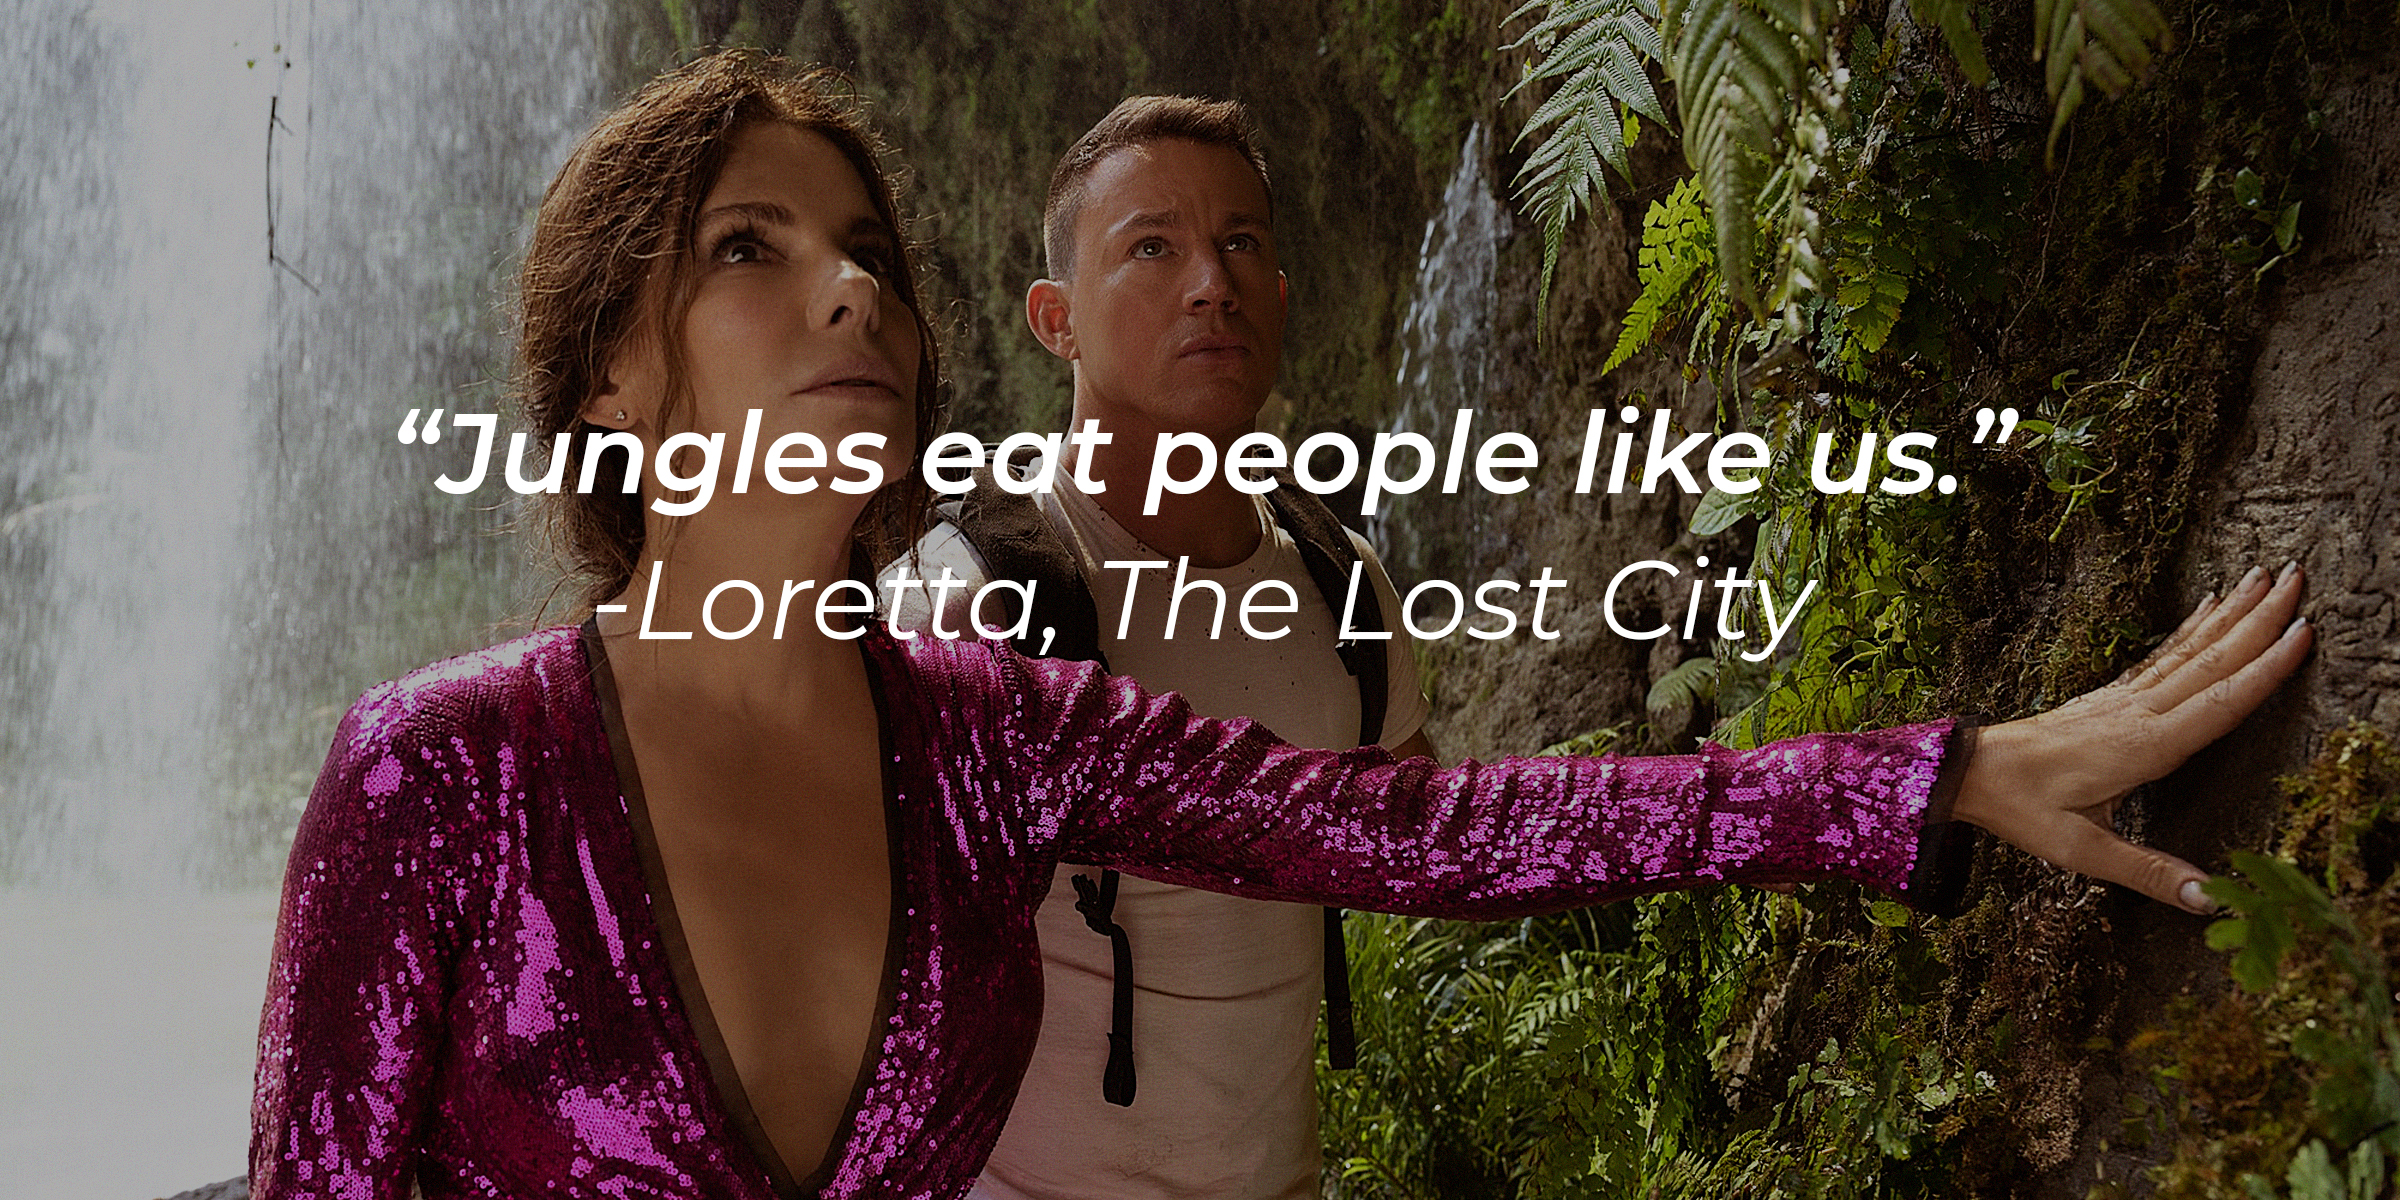 Loretta with her quote: "Jungles eat people like us." | Source: facebook.com/TheLostCityMovie